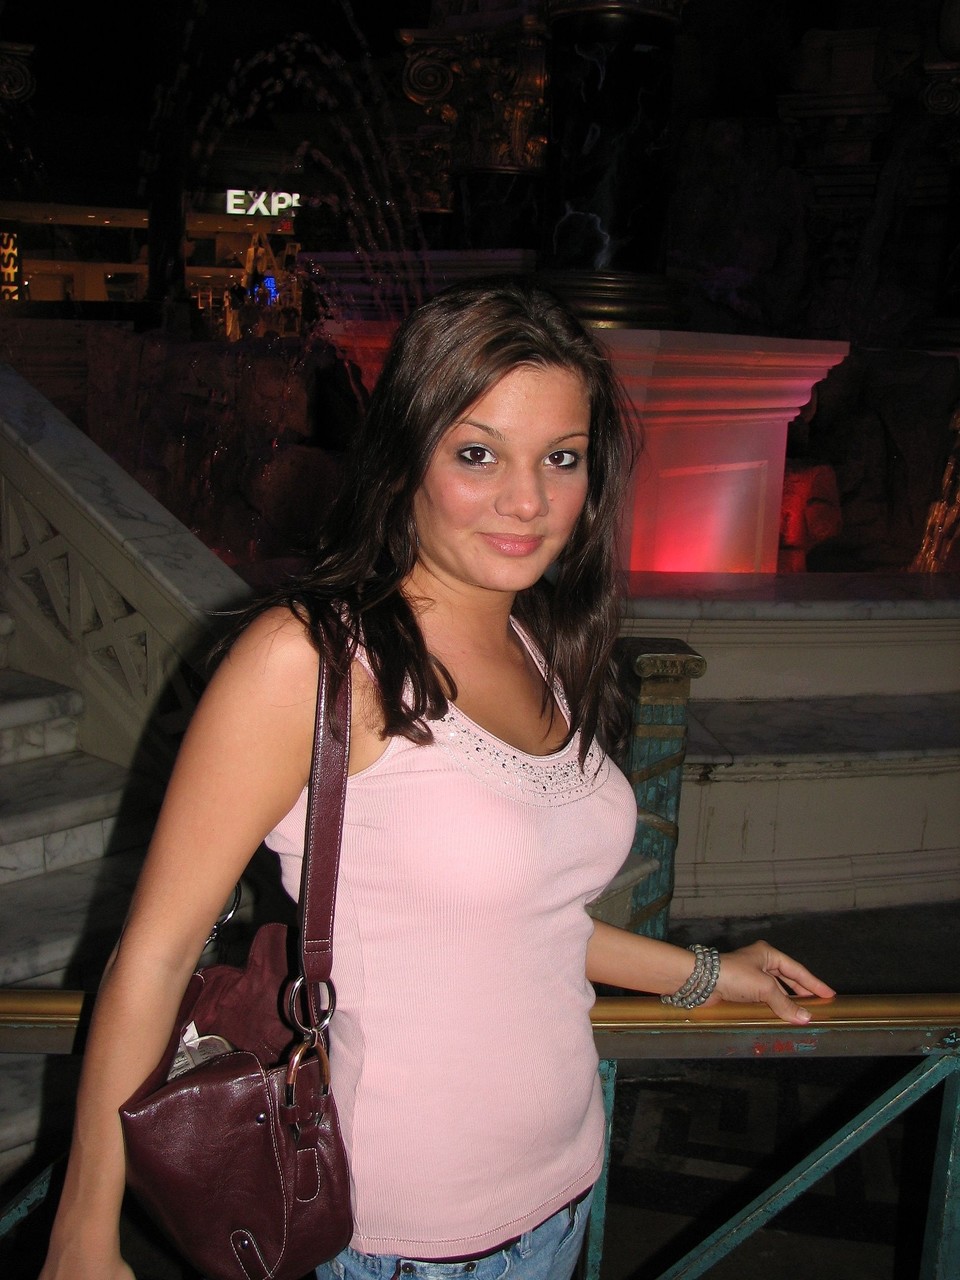 Amateur Katie in tight jeans flashes her big boobs with puffy nips in public porno fotoğrafı #426861590 | Teen Girl Photos Pics, Amateur, mobil porno